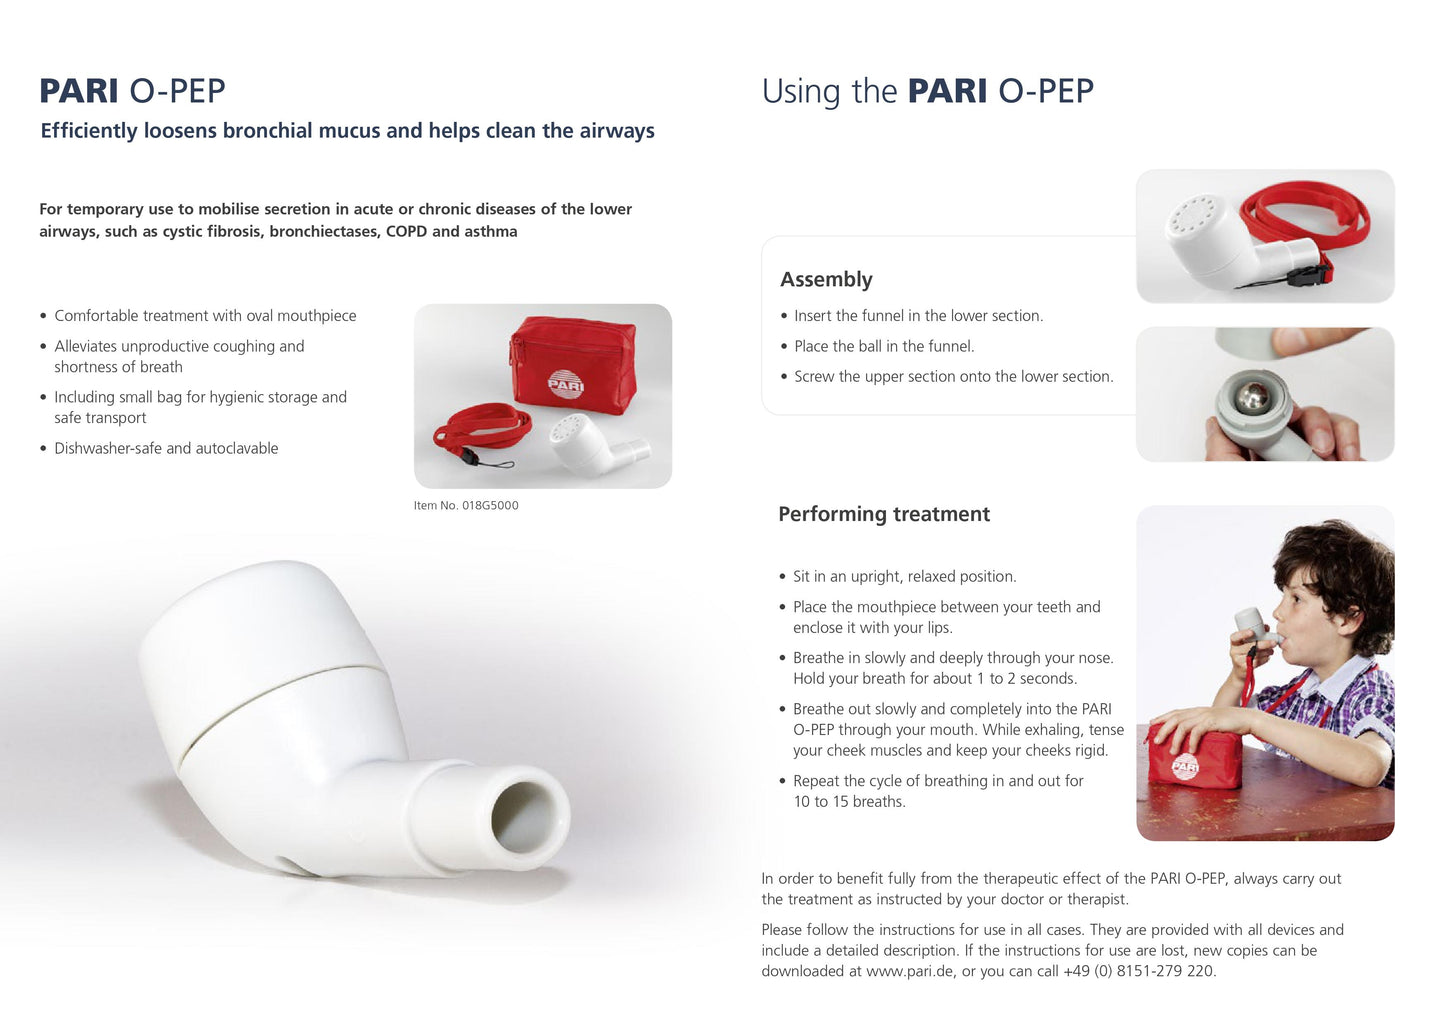 PARI O-PEP breathing therapy device